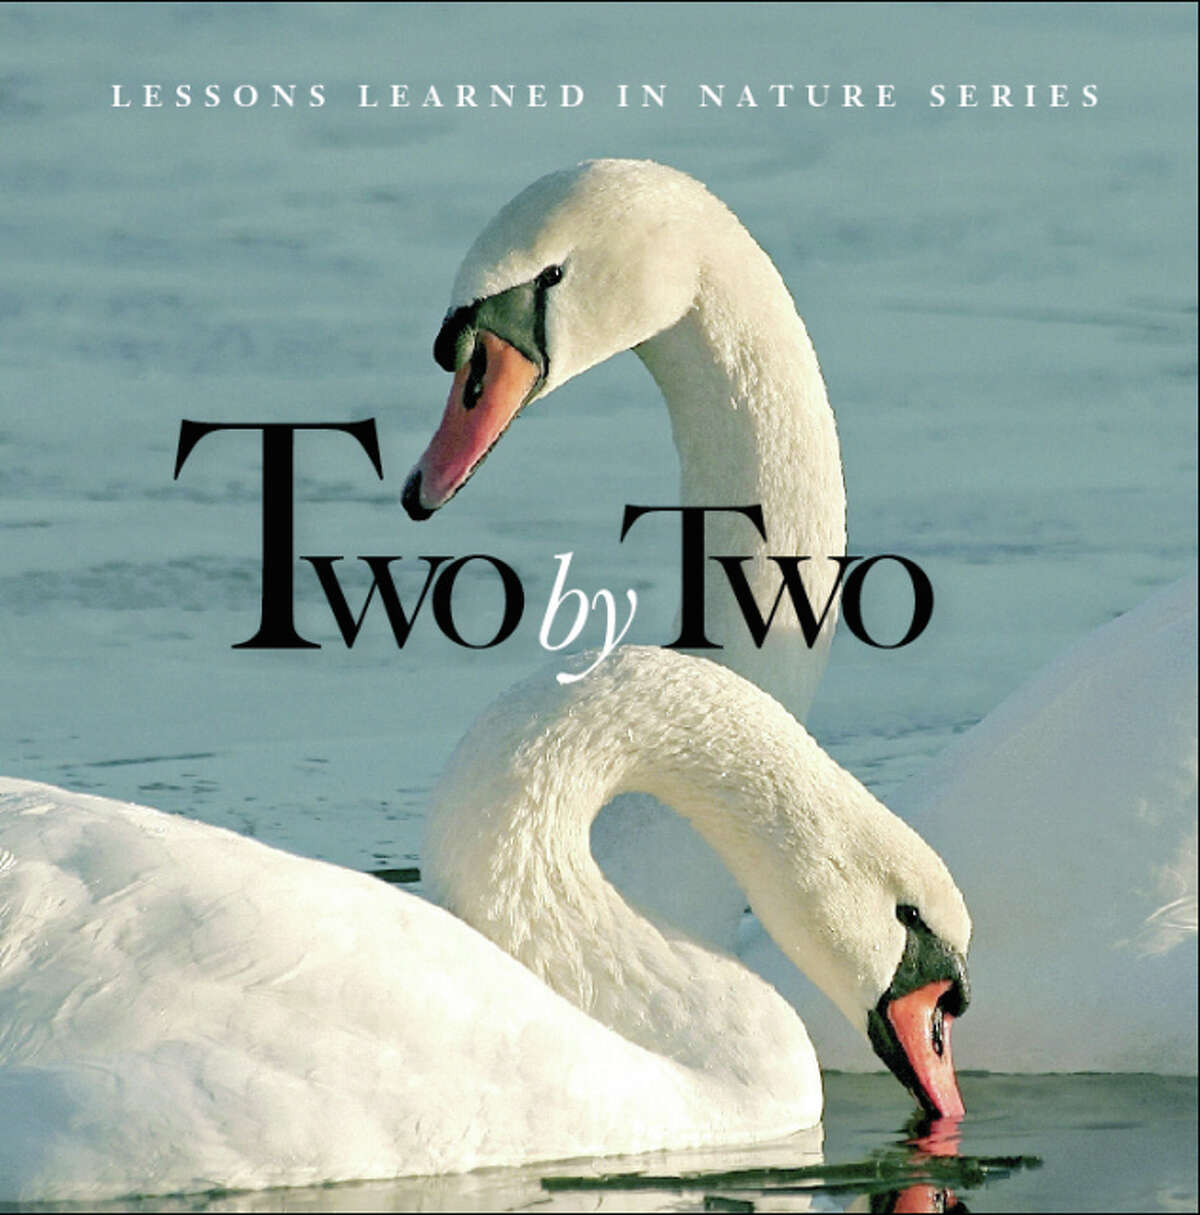 Other Lessons Learned in Nature Quotes for Life titles are available for retail, including “Two by Two,” shown here, “Think Deep,” “Small World,” and “Pet Therapy,” which are sold online and at gift boutiques, including Jeni J’s Unique Gifts and Guest Houses in Grafton.